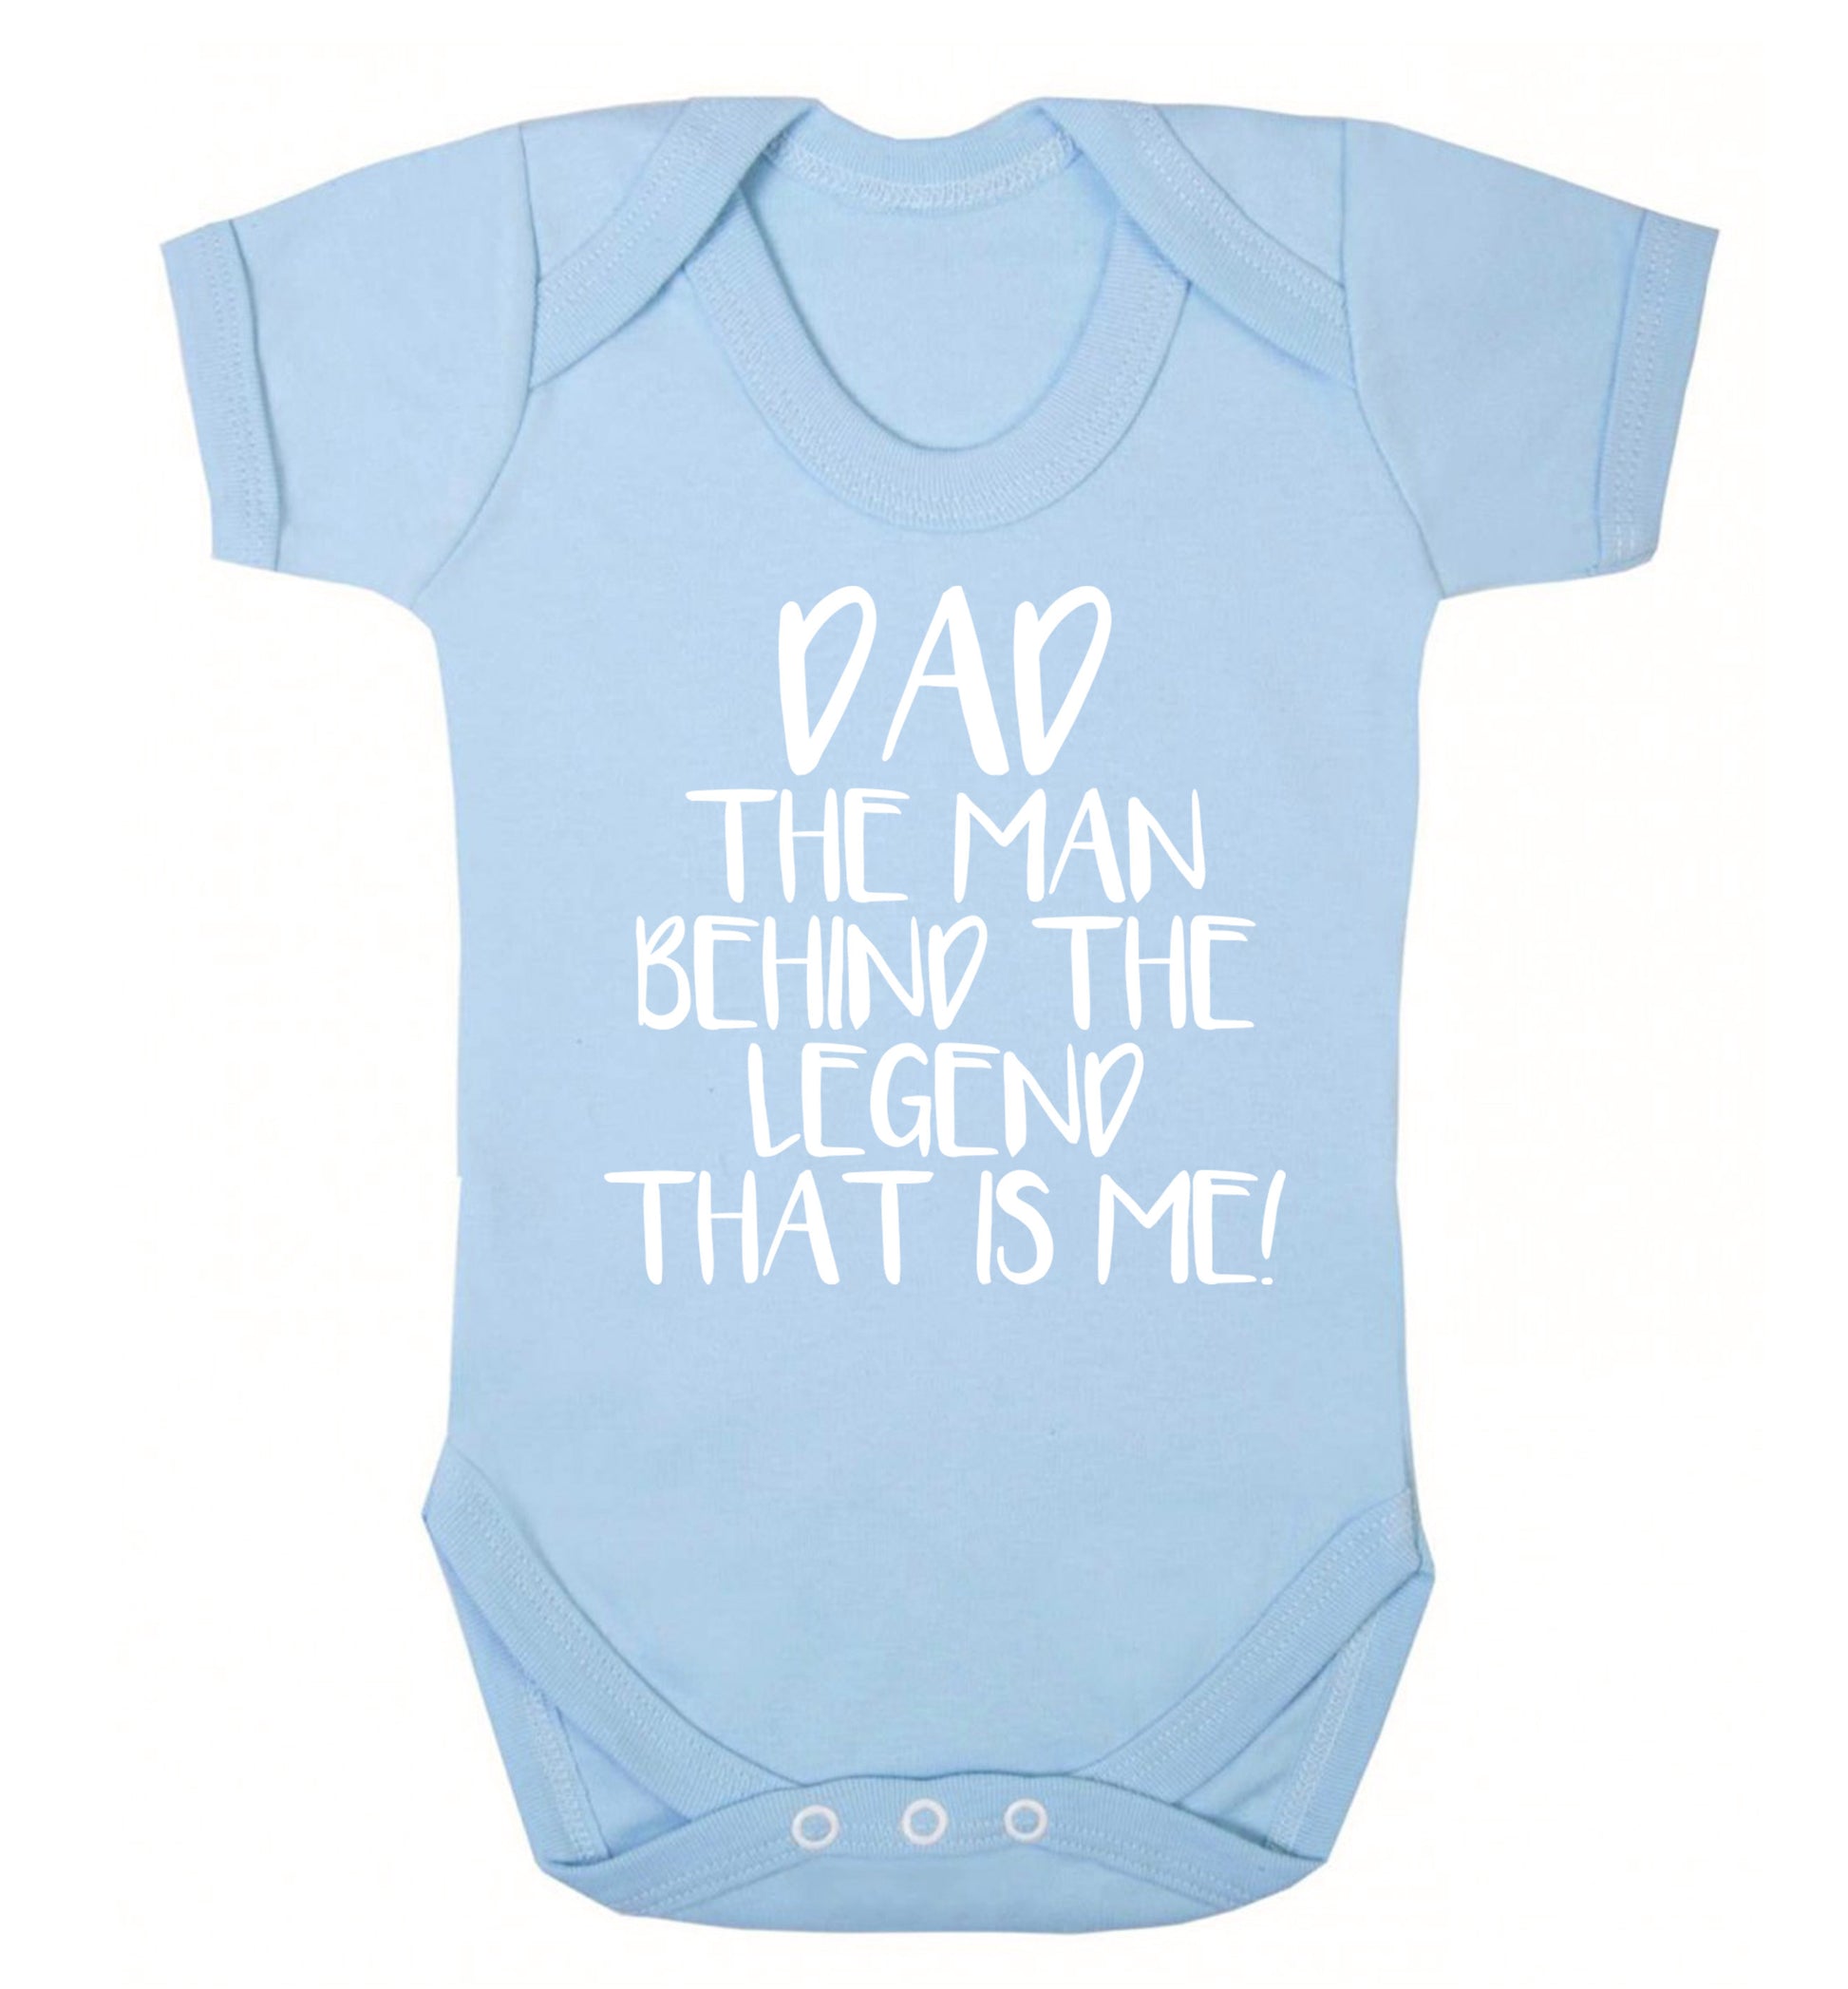 Dad the man behind the legend that is me! Baby Vest pale blue 18-24 months